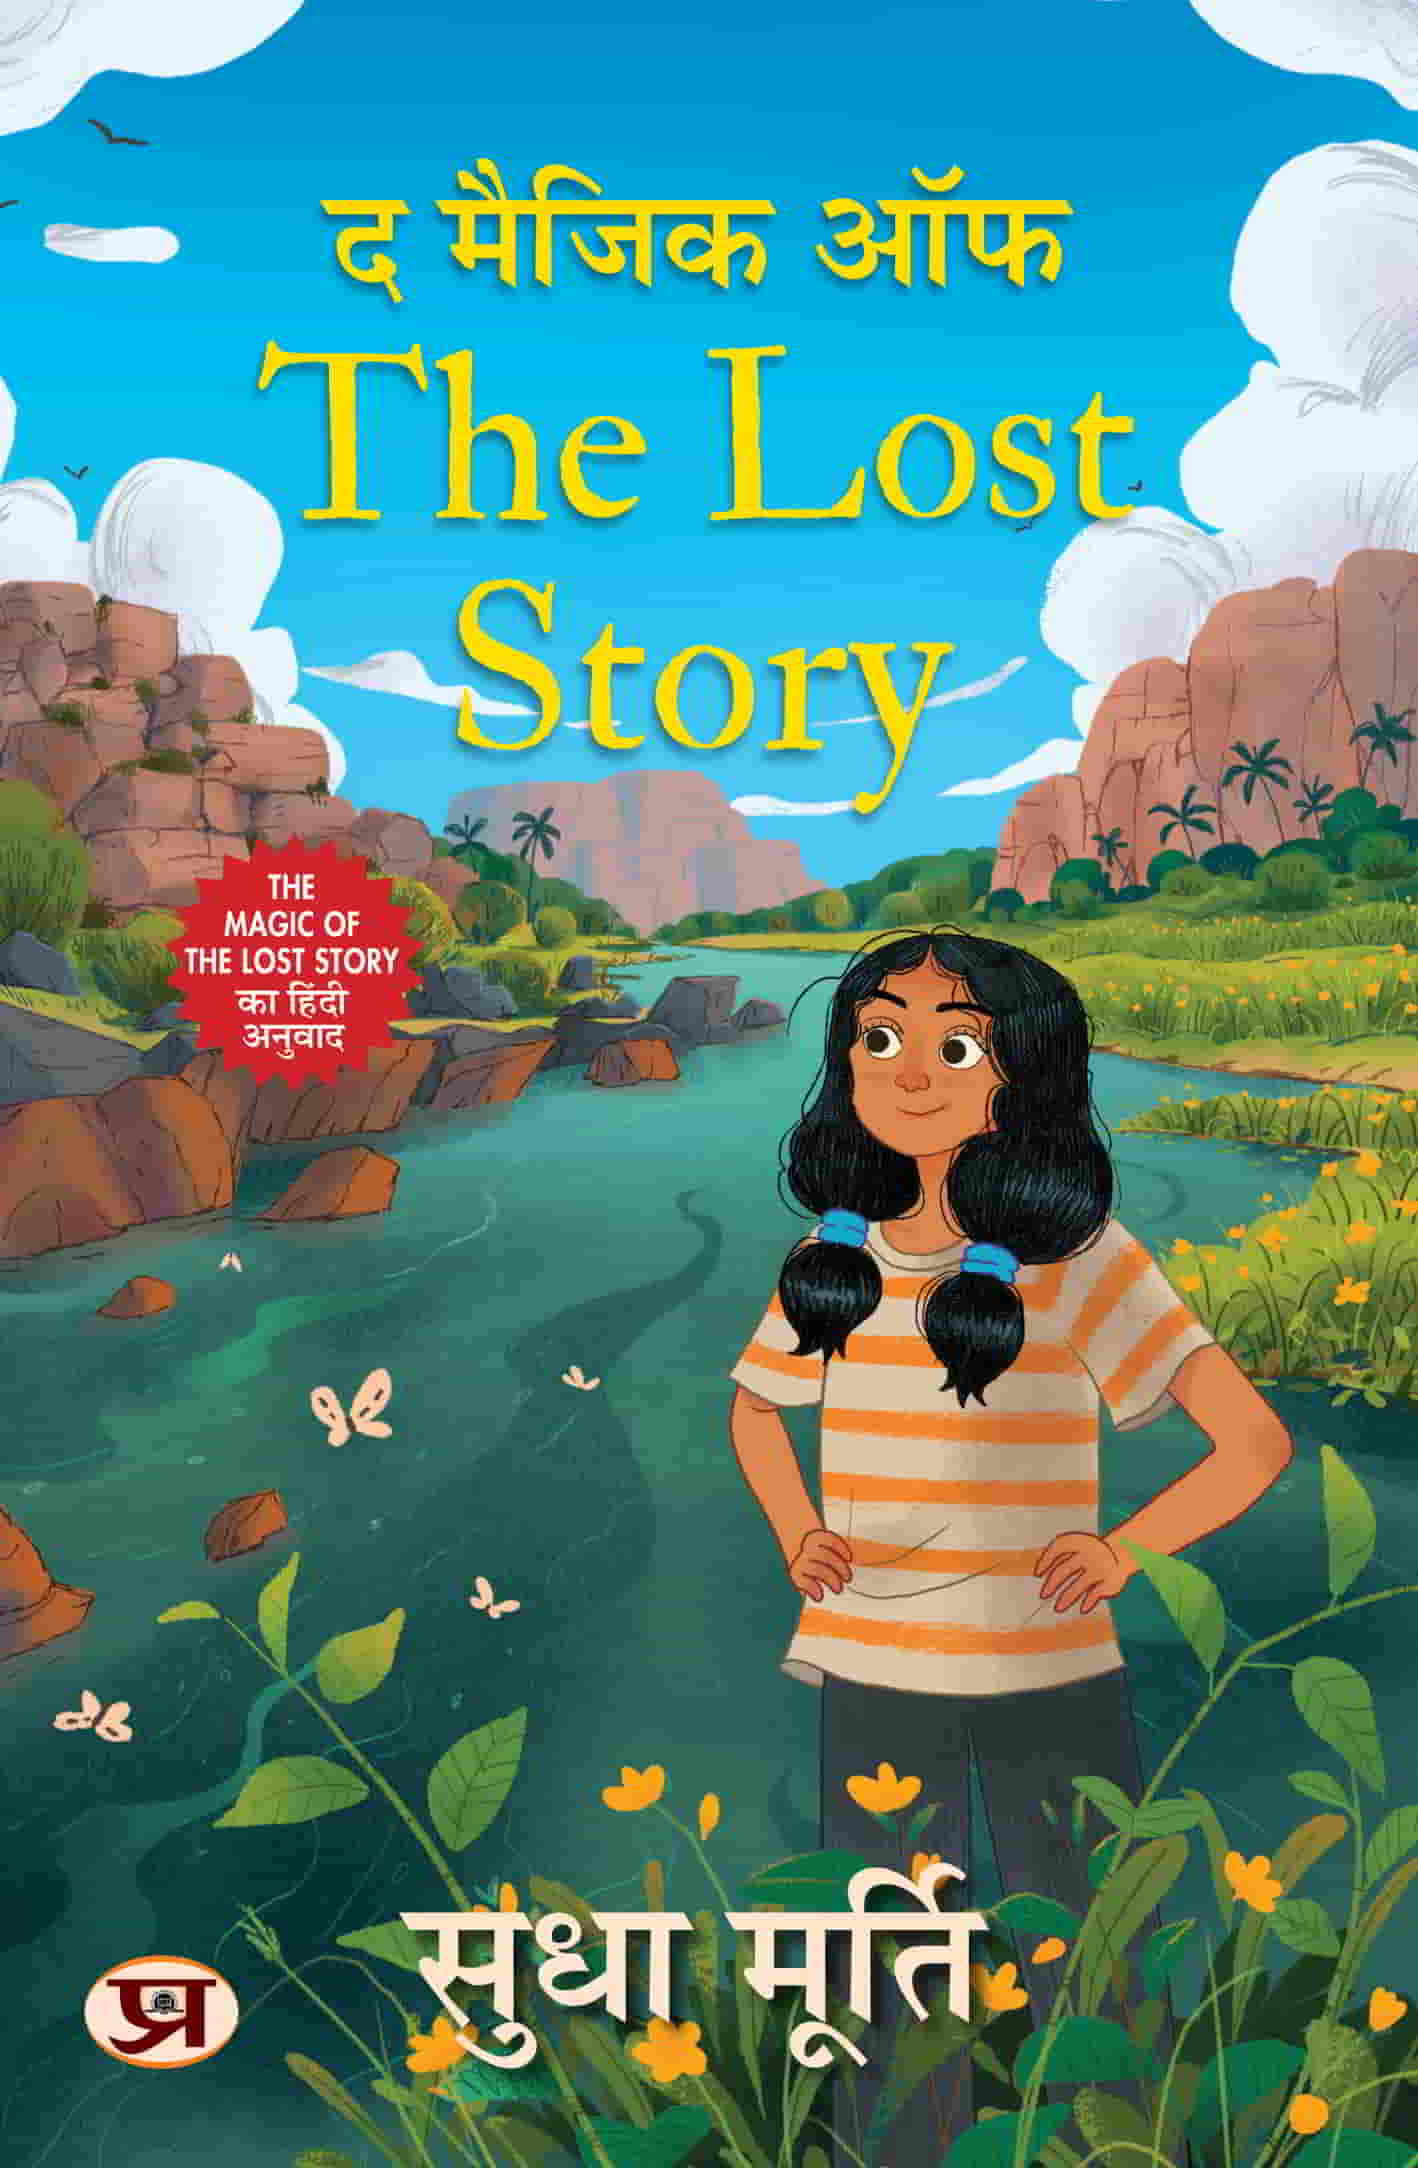 The Magic of The Lost Story | Fablous Stories | Short-Story Collection For Children | Sudha Murty Book in Hindi